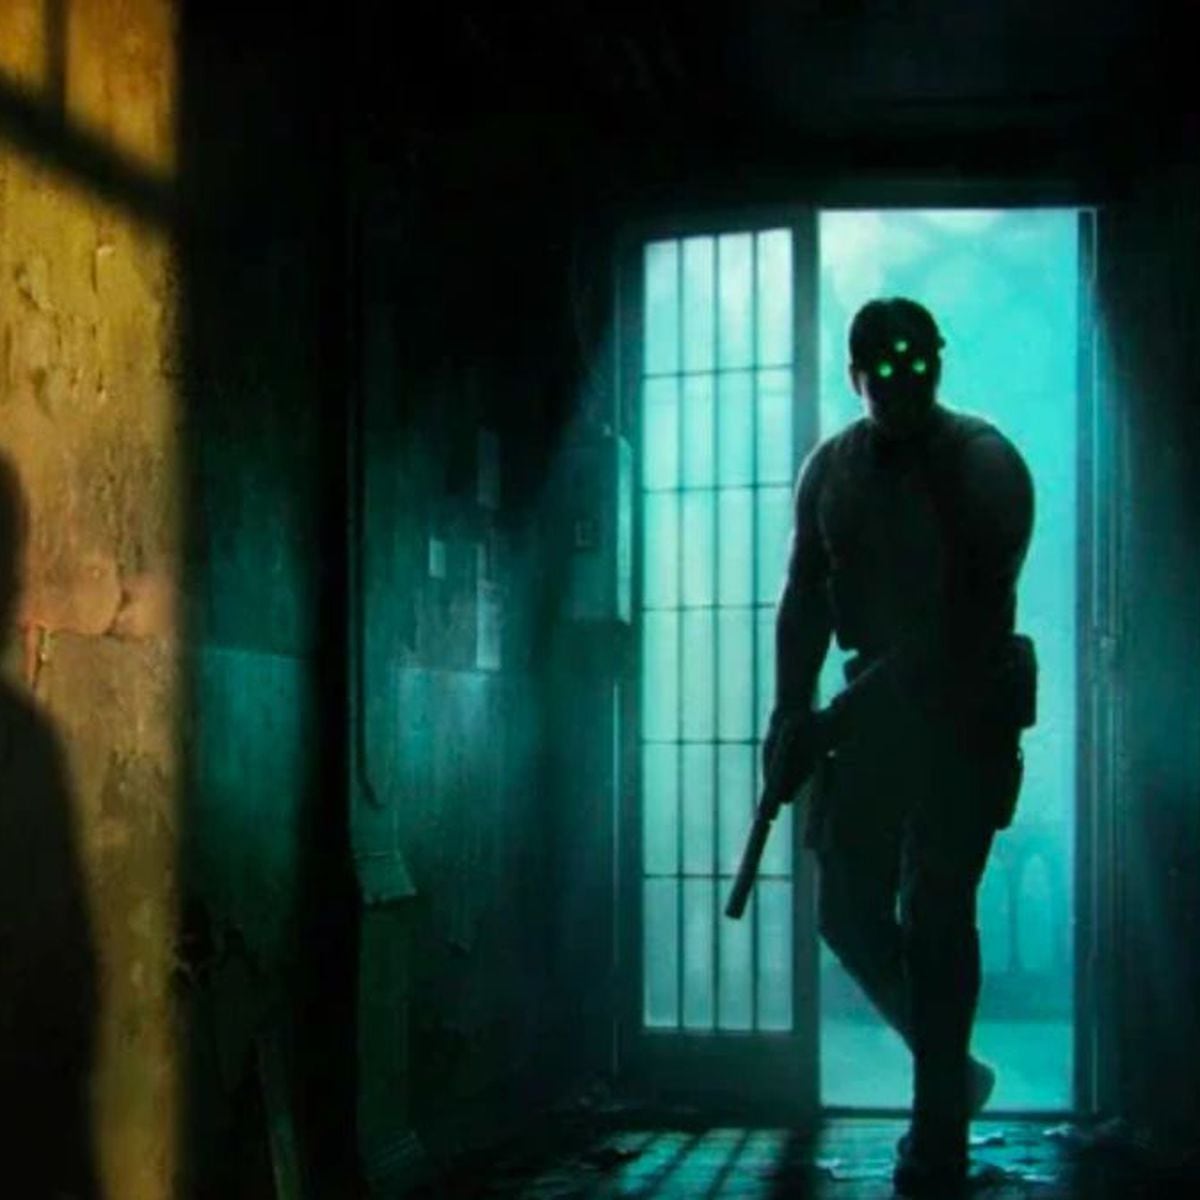 New Splinter Cell Remake Concept Art And Details Revealed In